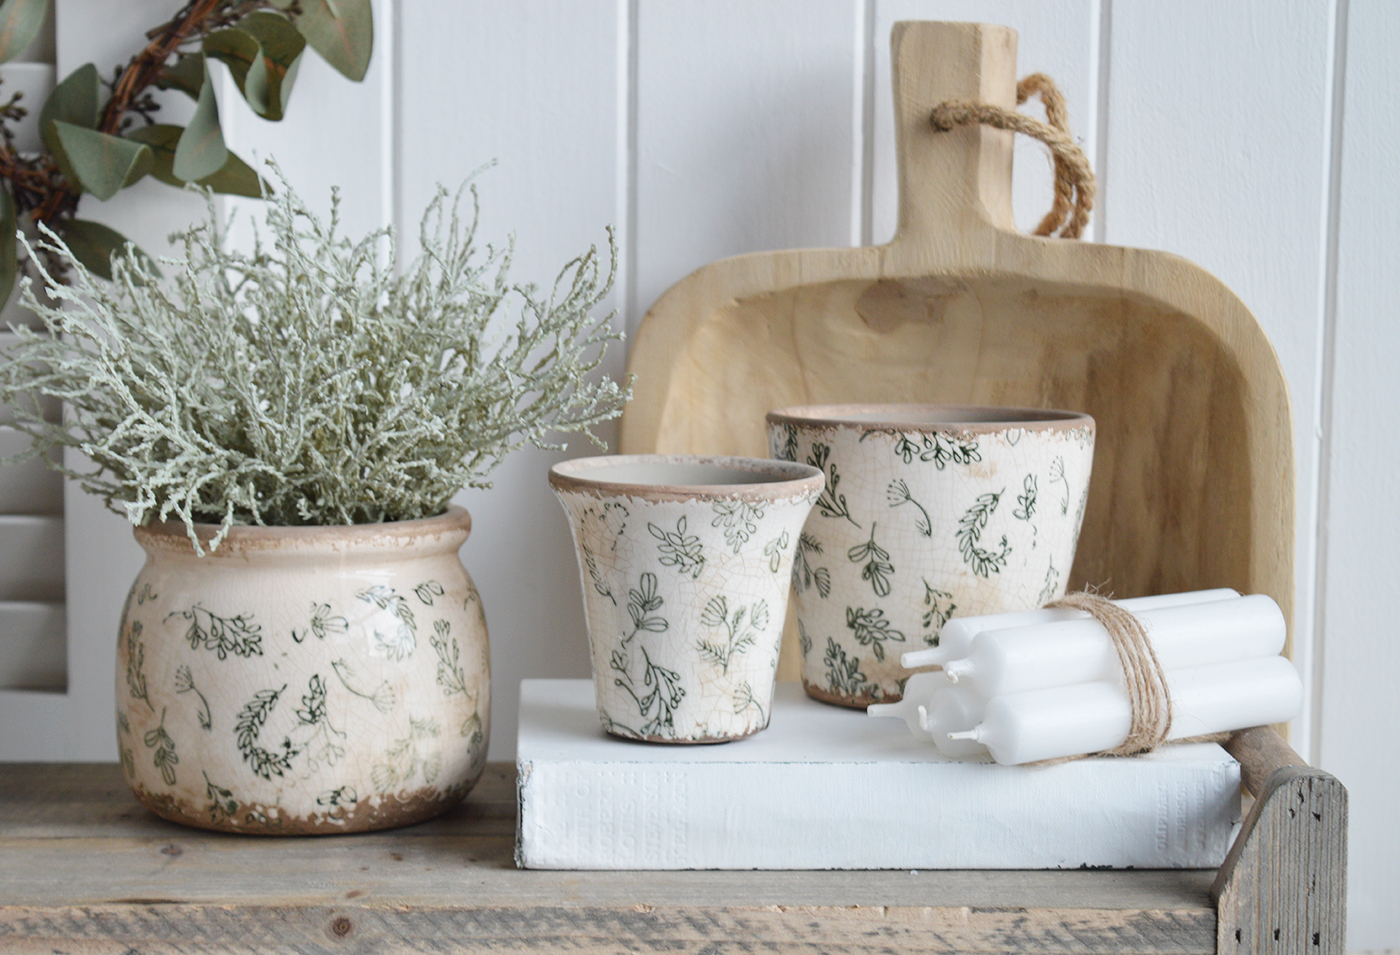 Westbrook vintage style ceramics to suit New England interiors complementing modern farmhouse, country and coastal furniture